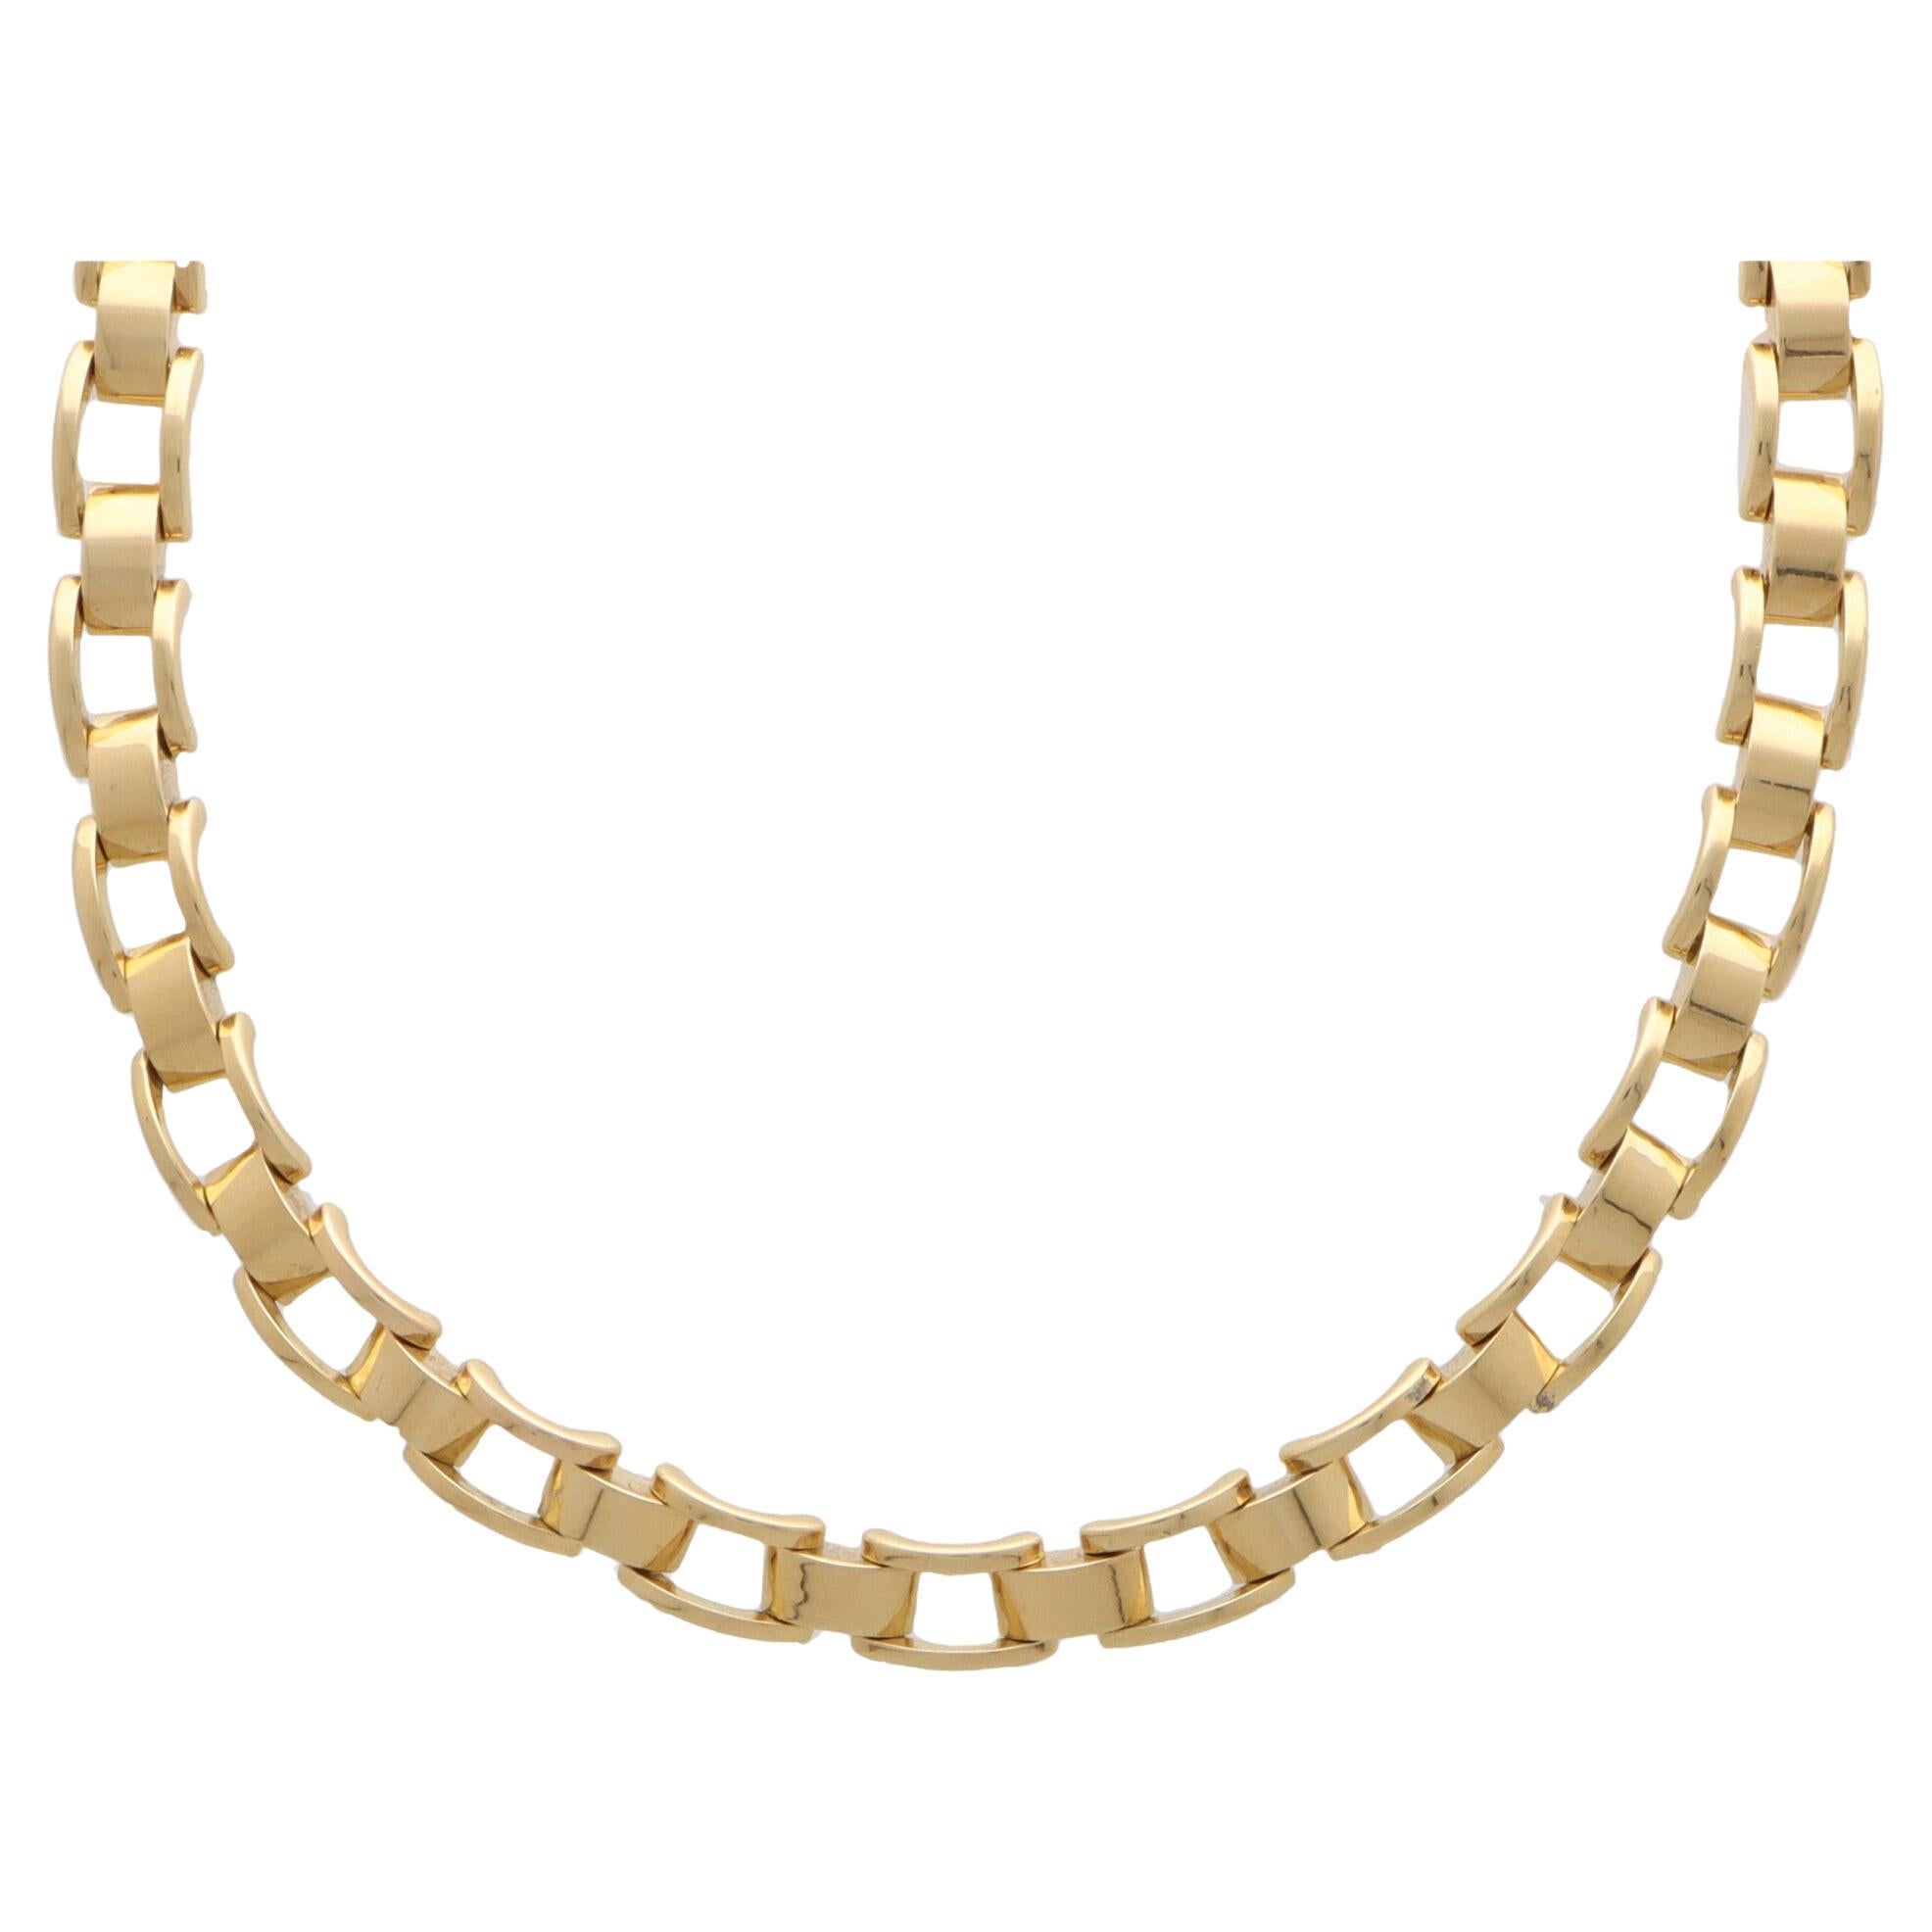 Vintage Mauboussin Chain Link Necklace Set in 18k Yellow Gold